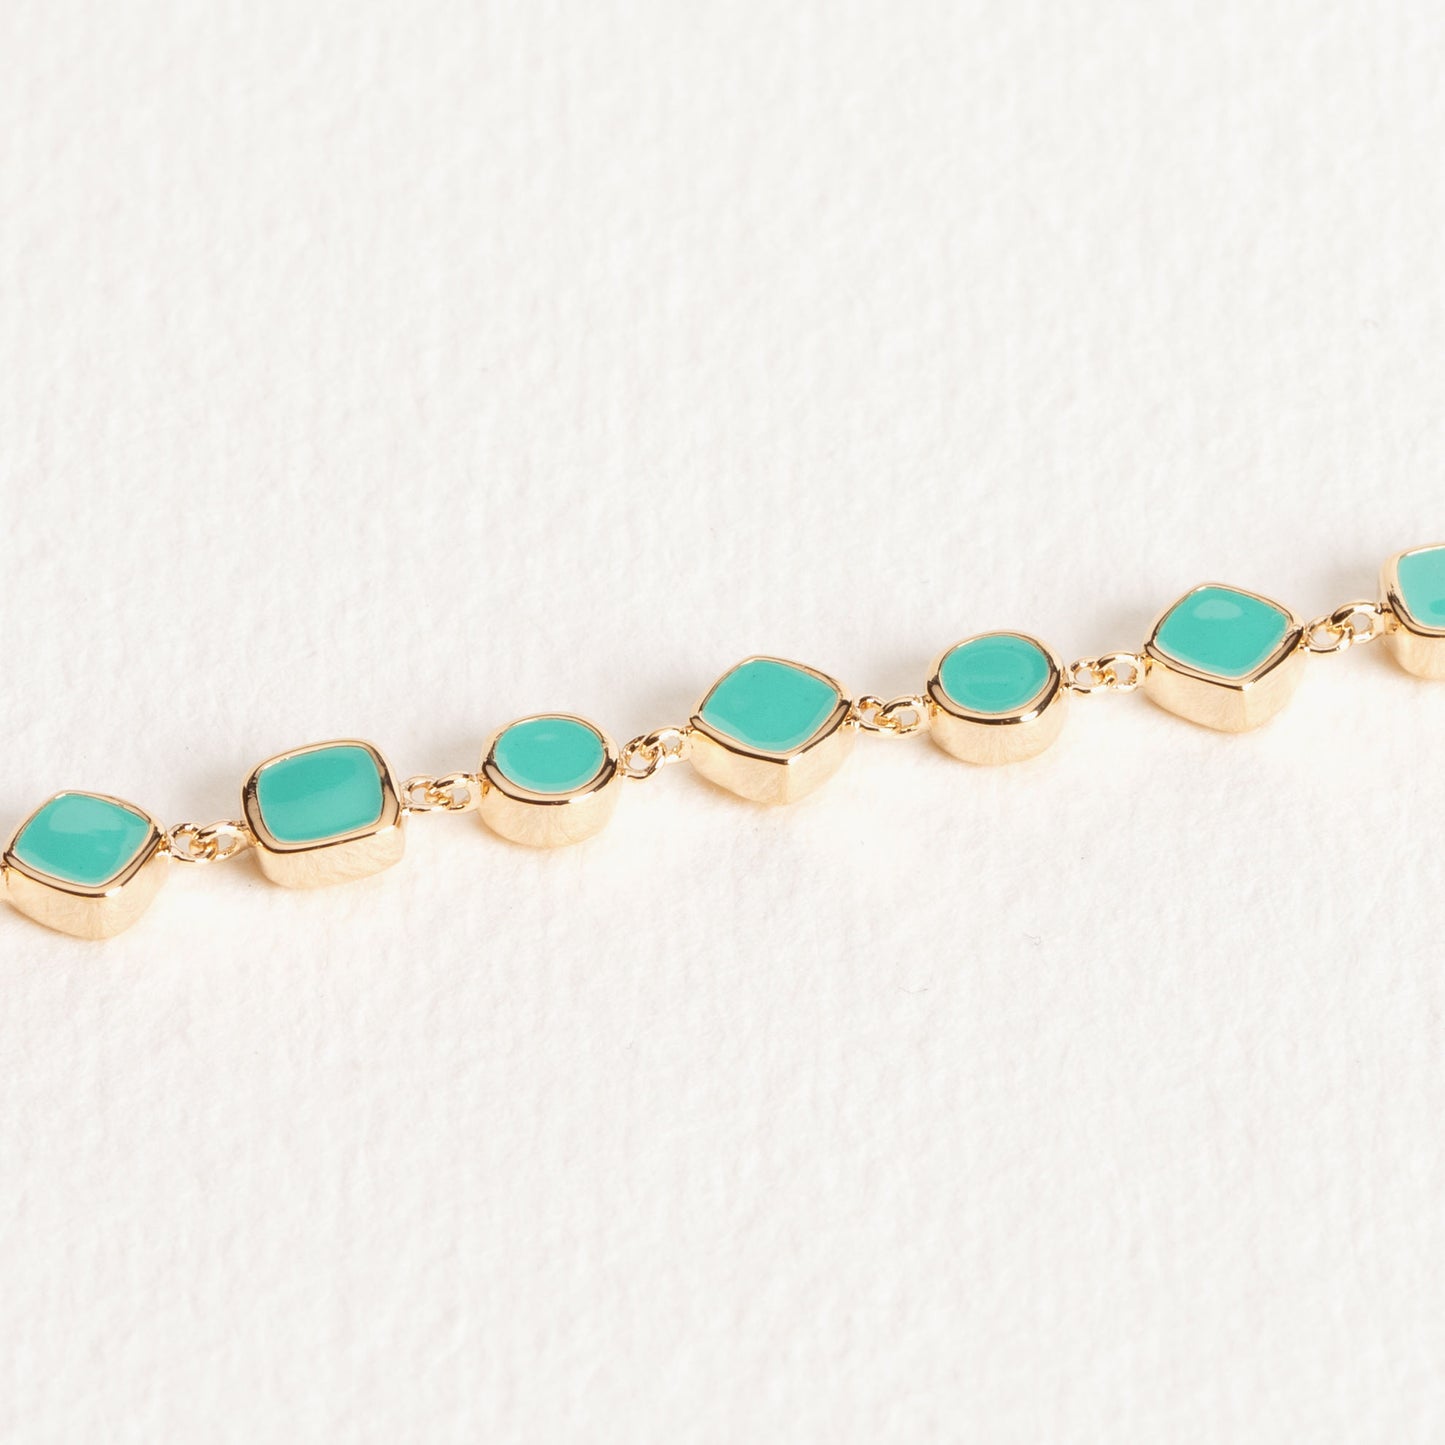 Gioia - Turquoise - Gold Plated Bracelet - Ana et Cha